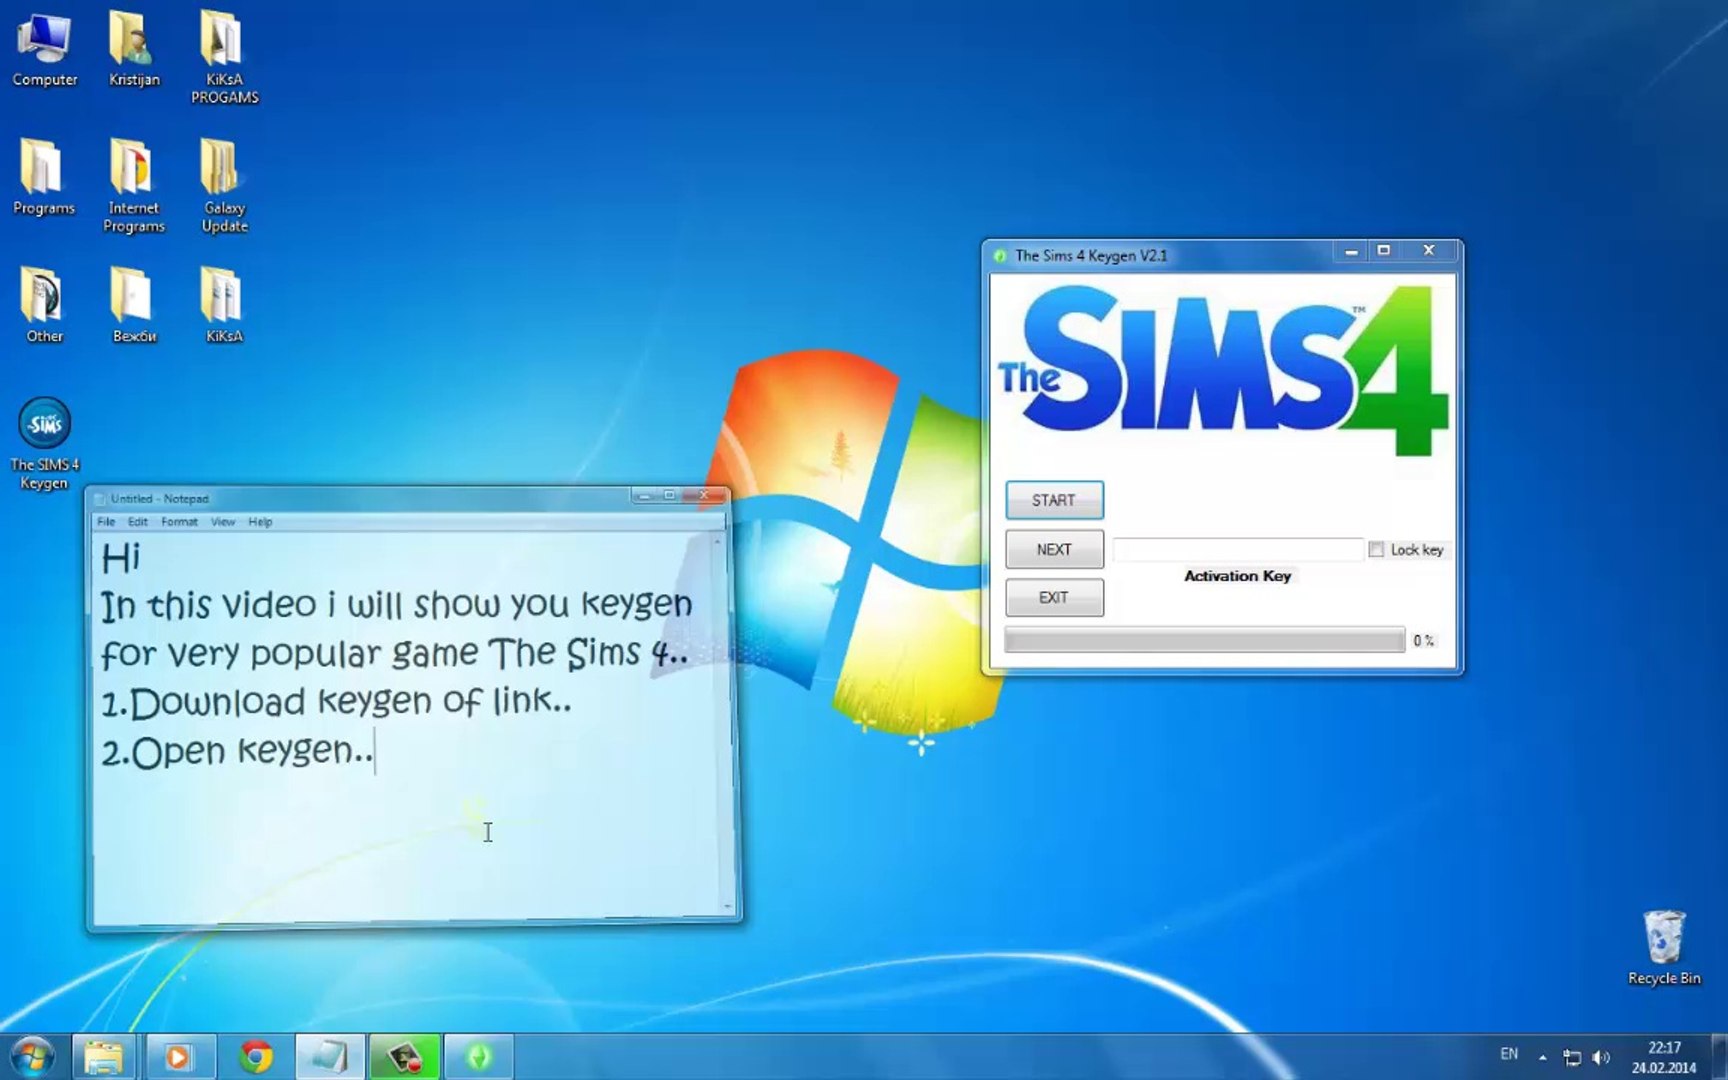 The Sims 4 Free Download + Serial Key